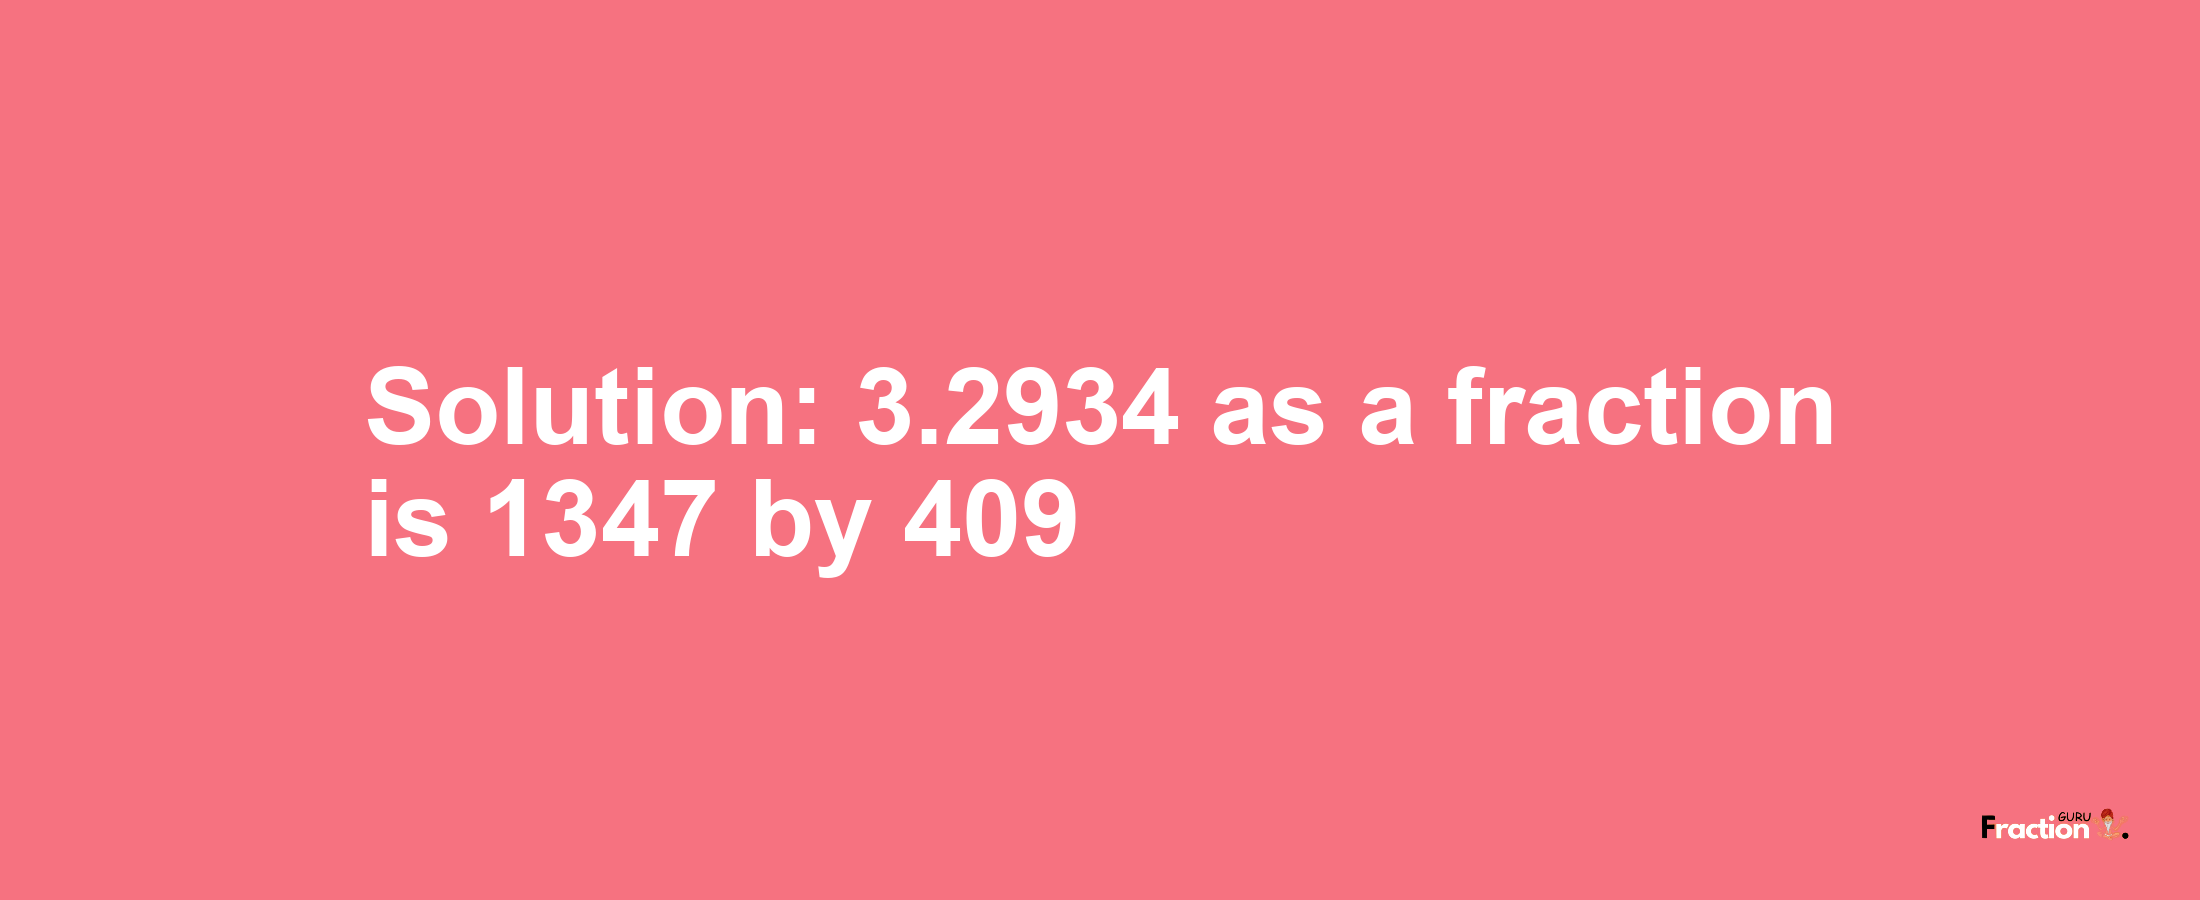 Solution:3.2934 as a fraction is 1347/409